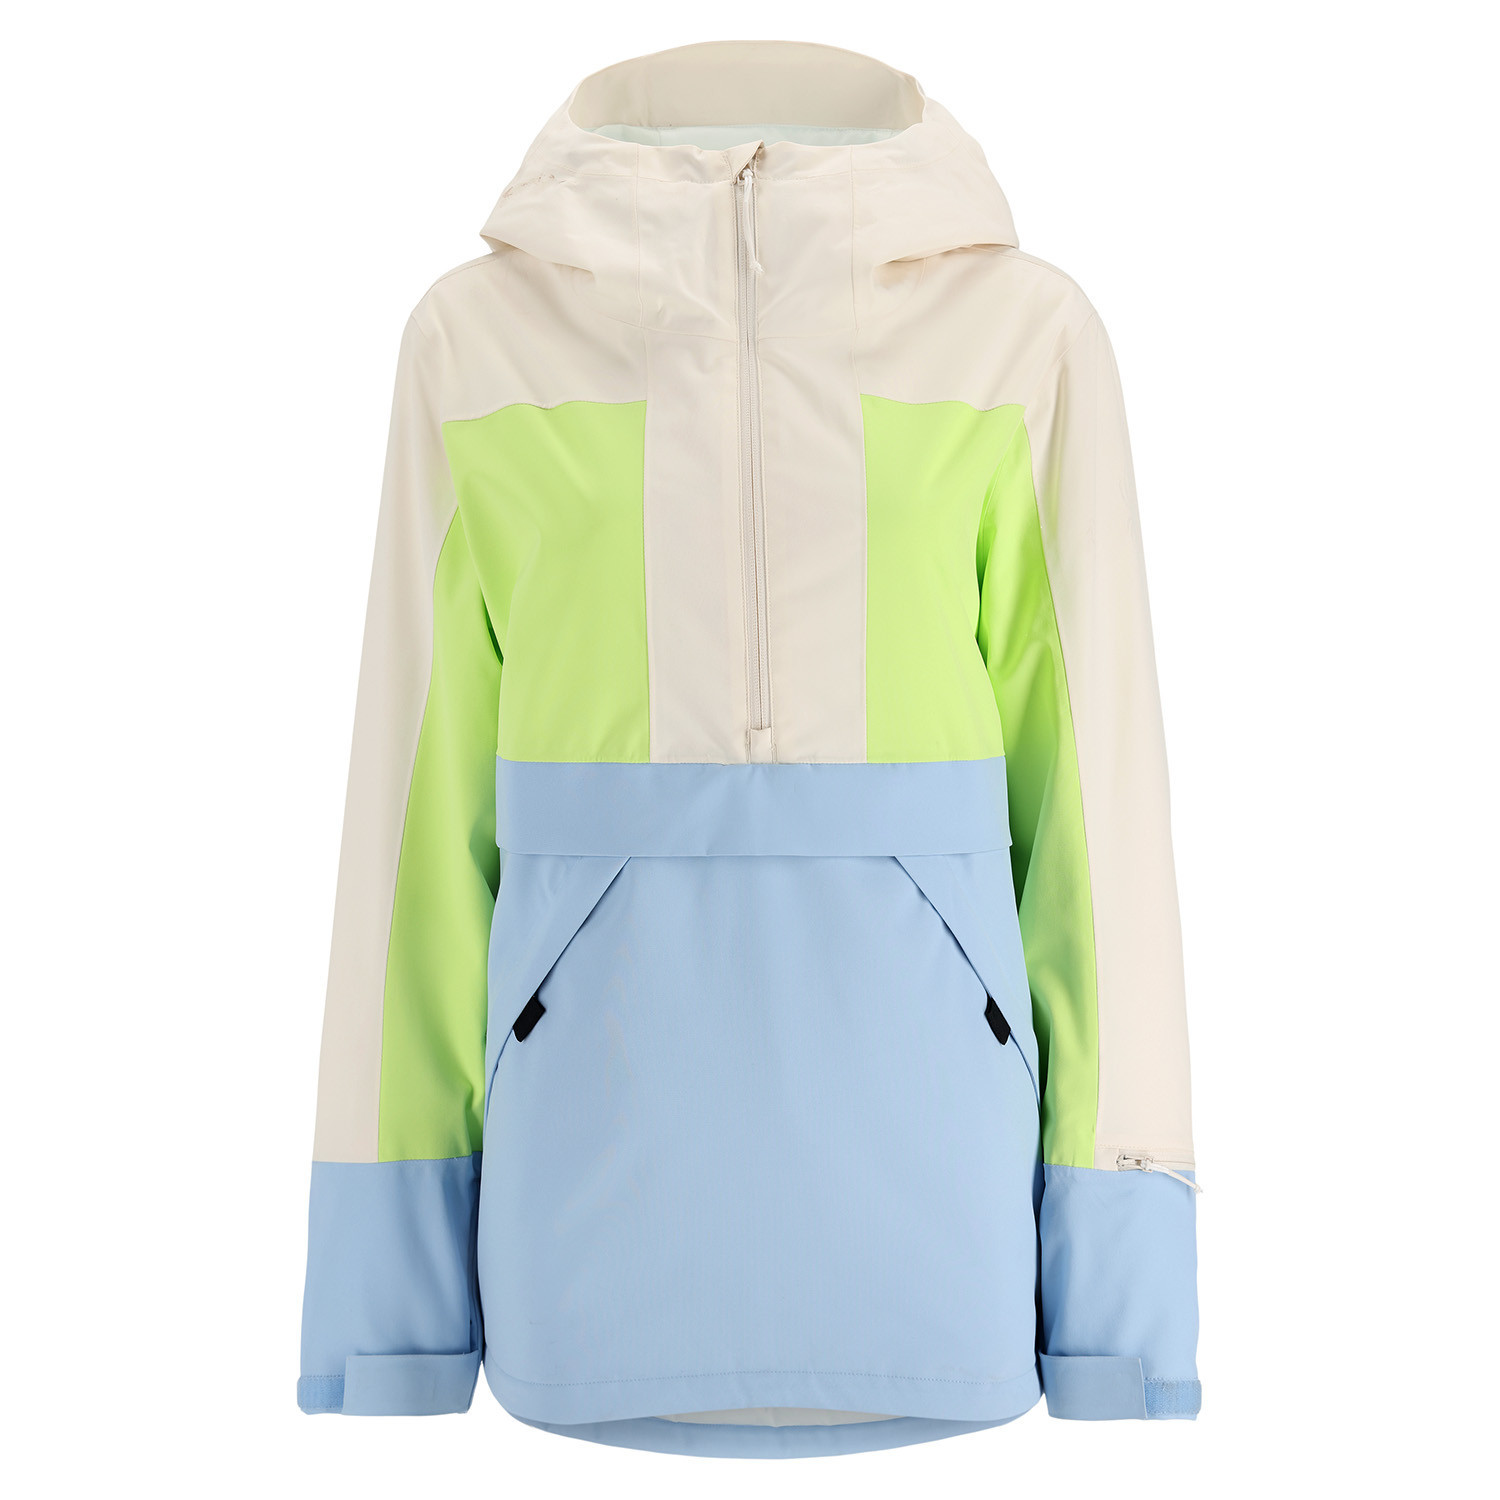 Spyder All Out Anorak Jacket // Women's